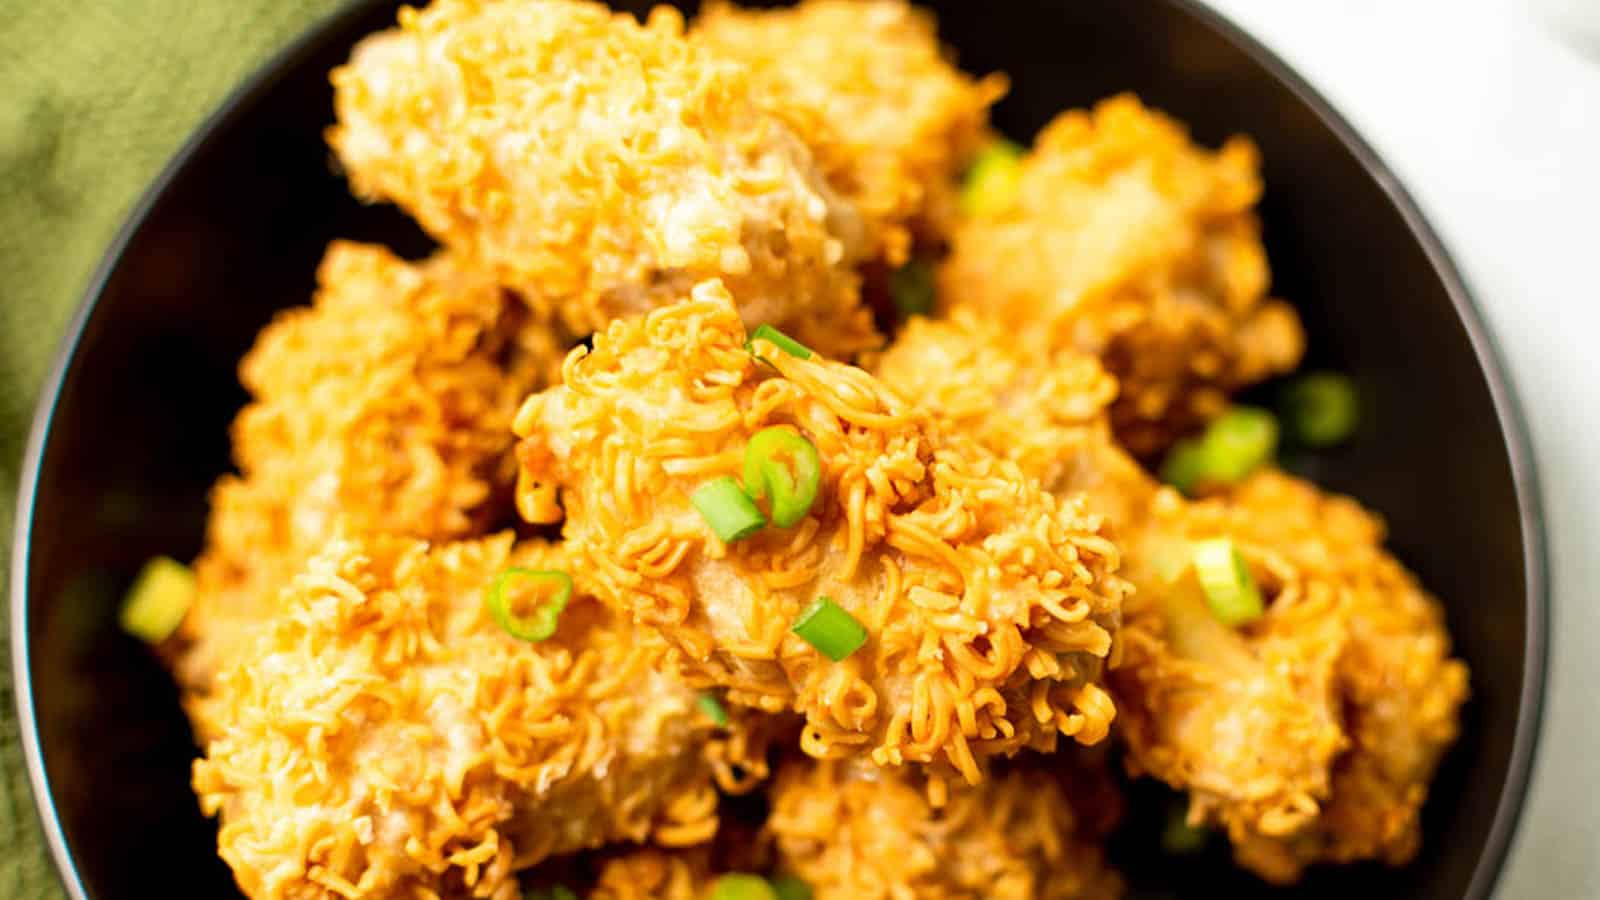 <p>If you’re after an easy chicken dinner that’ll make your mom envious, Ramen Fried Chicken is a great bet. It’s got that crunchy twist that makes it stand out at any gathering. Perfect for a busy night, it’s a meal that keeps things interesting and fun.<br><strong>Get the Recipe: </strong><a href="https://allwaysdelicious.com/ramen-fried-chicken/?utm_source=msn&utm_medium=page&utm_campaign=msn">Ramen Fried Chicken</a></p>